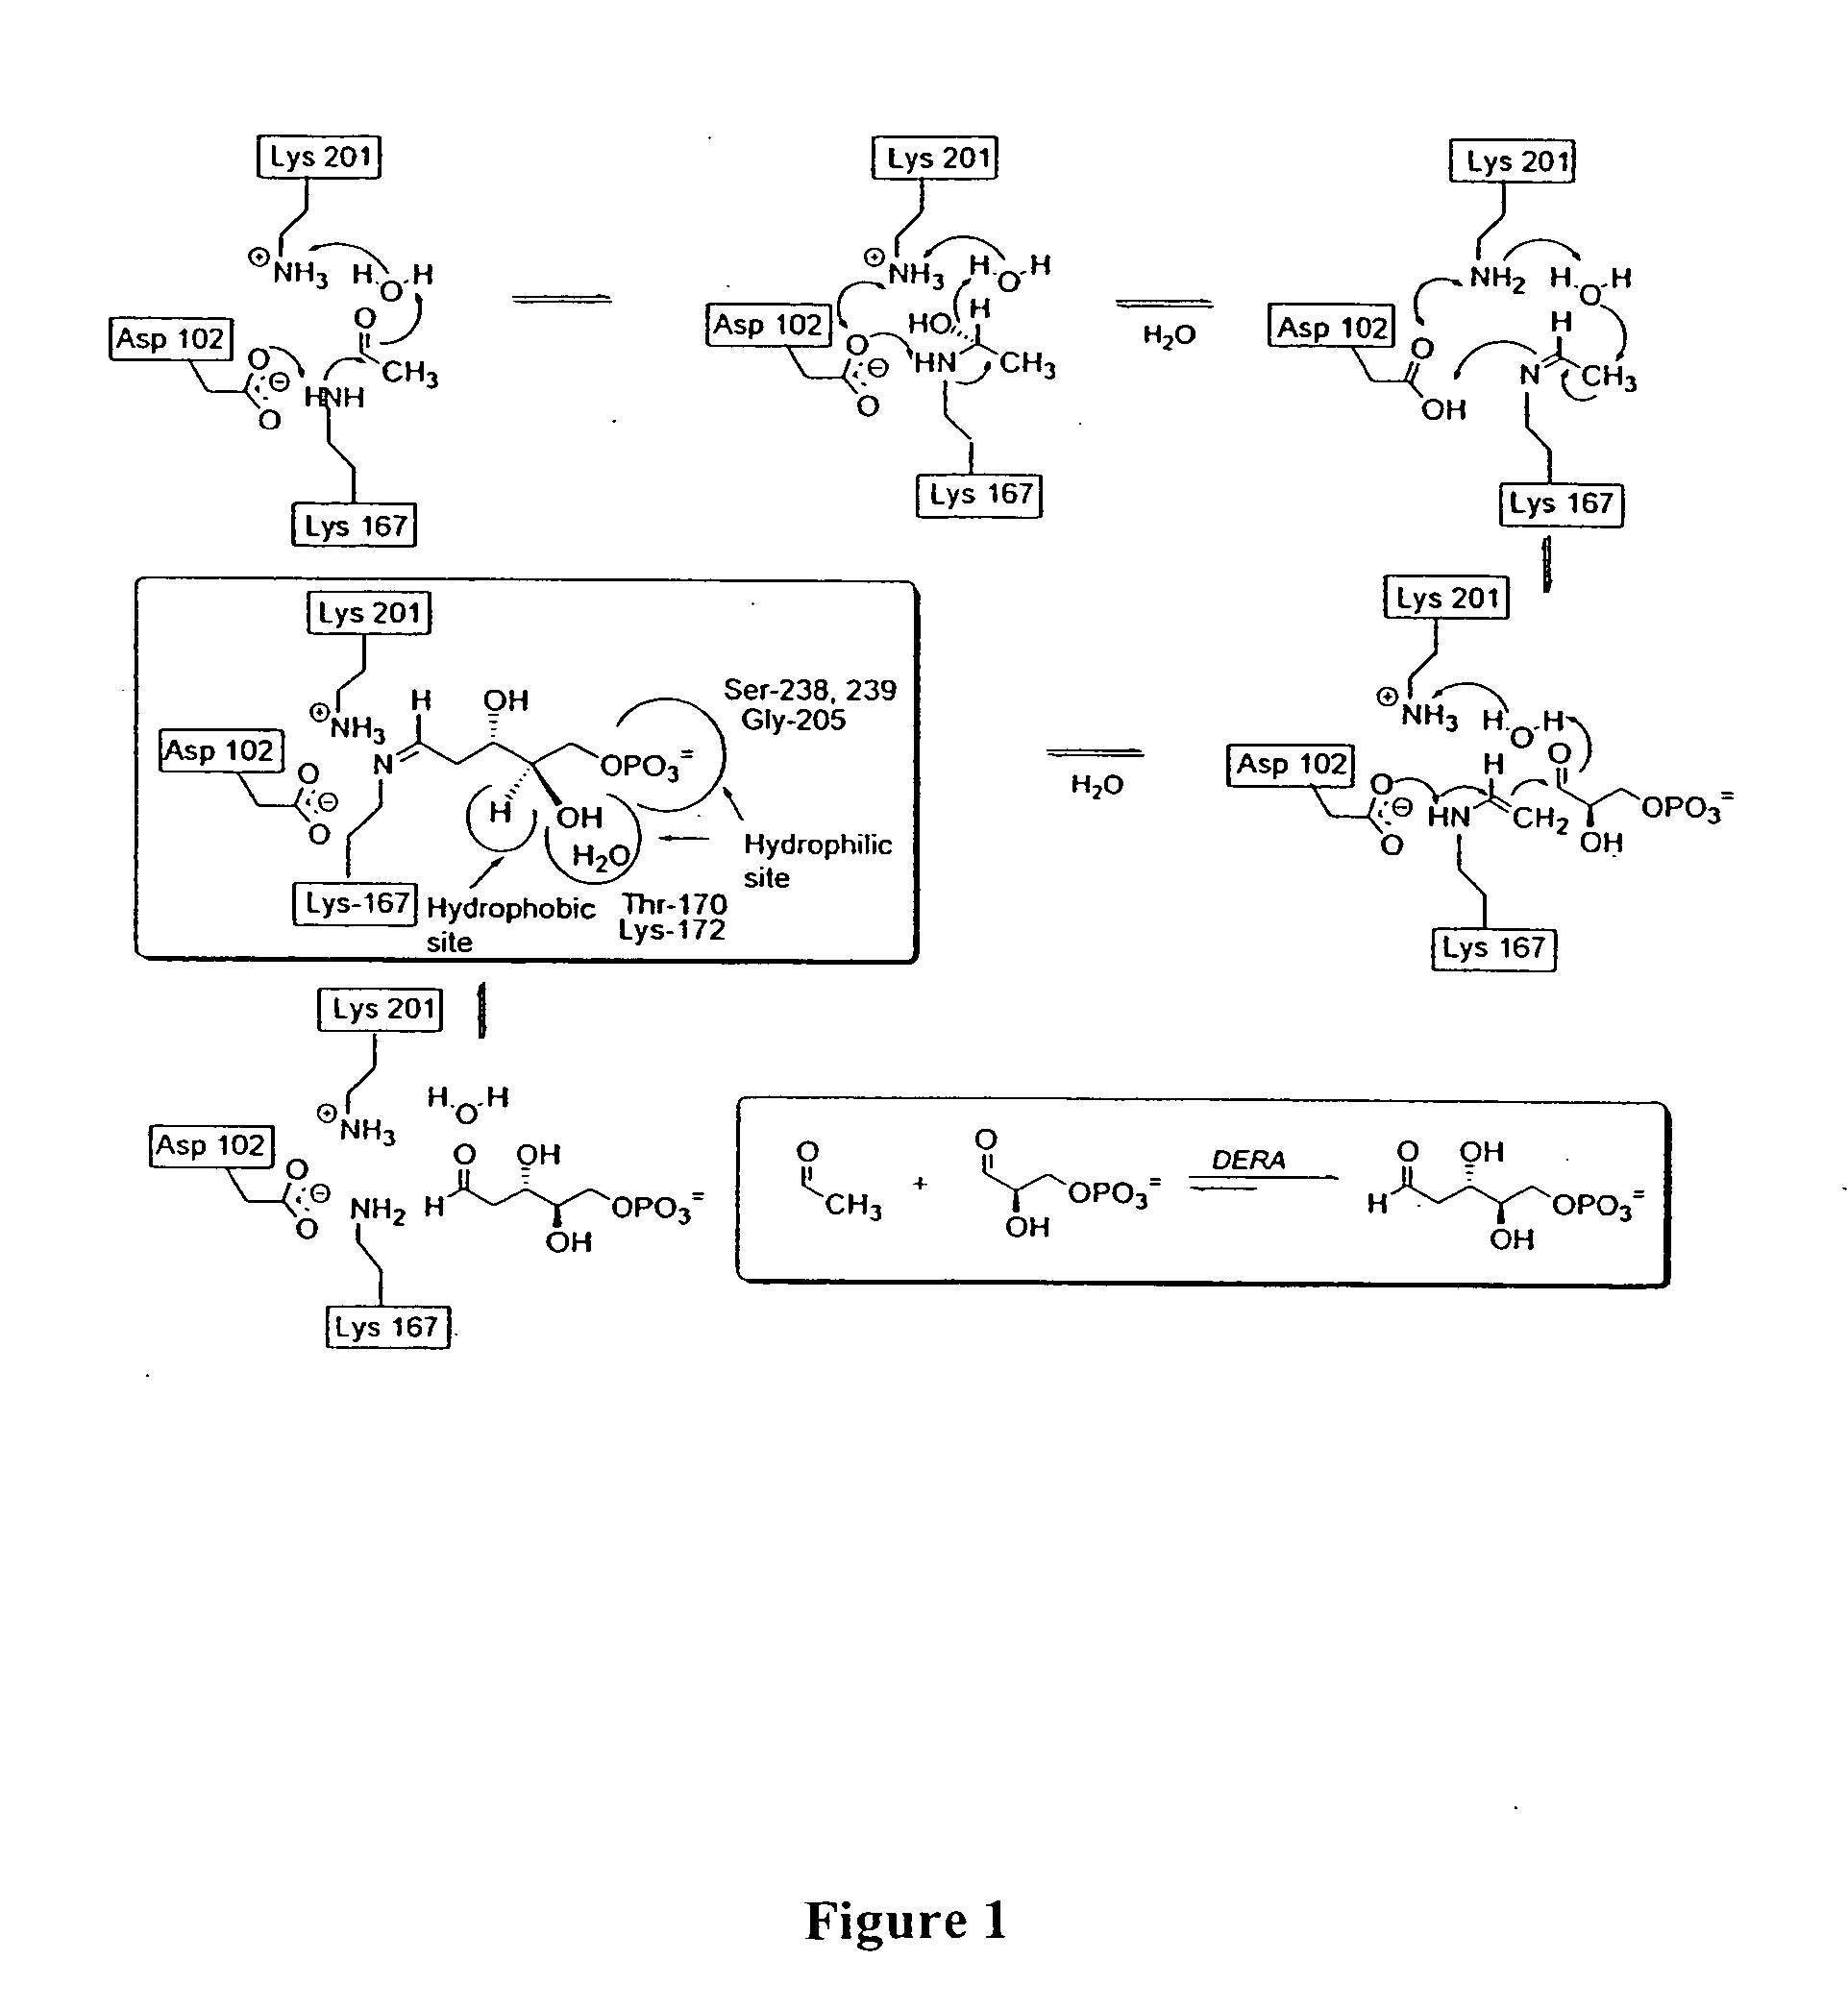 Synthesis of synthons for the manufacture of bioactive compounds